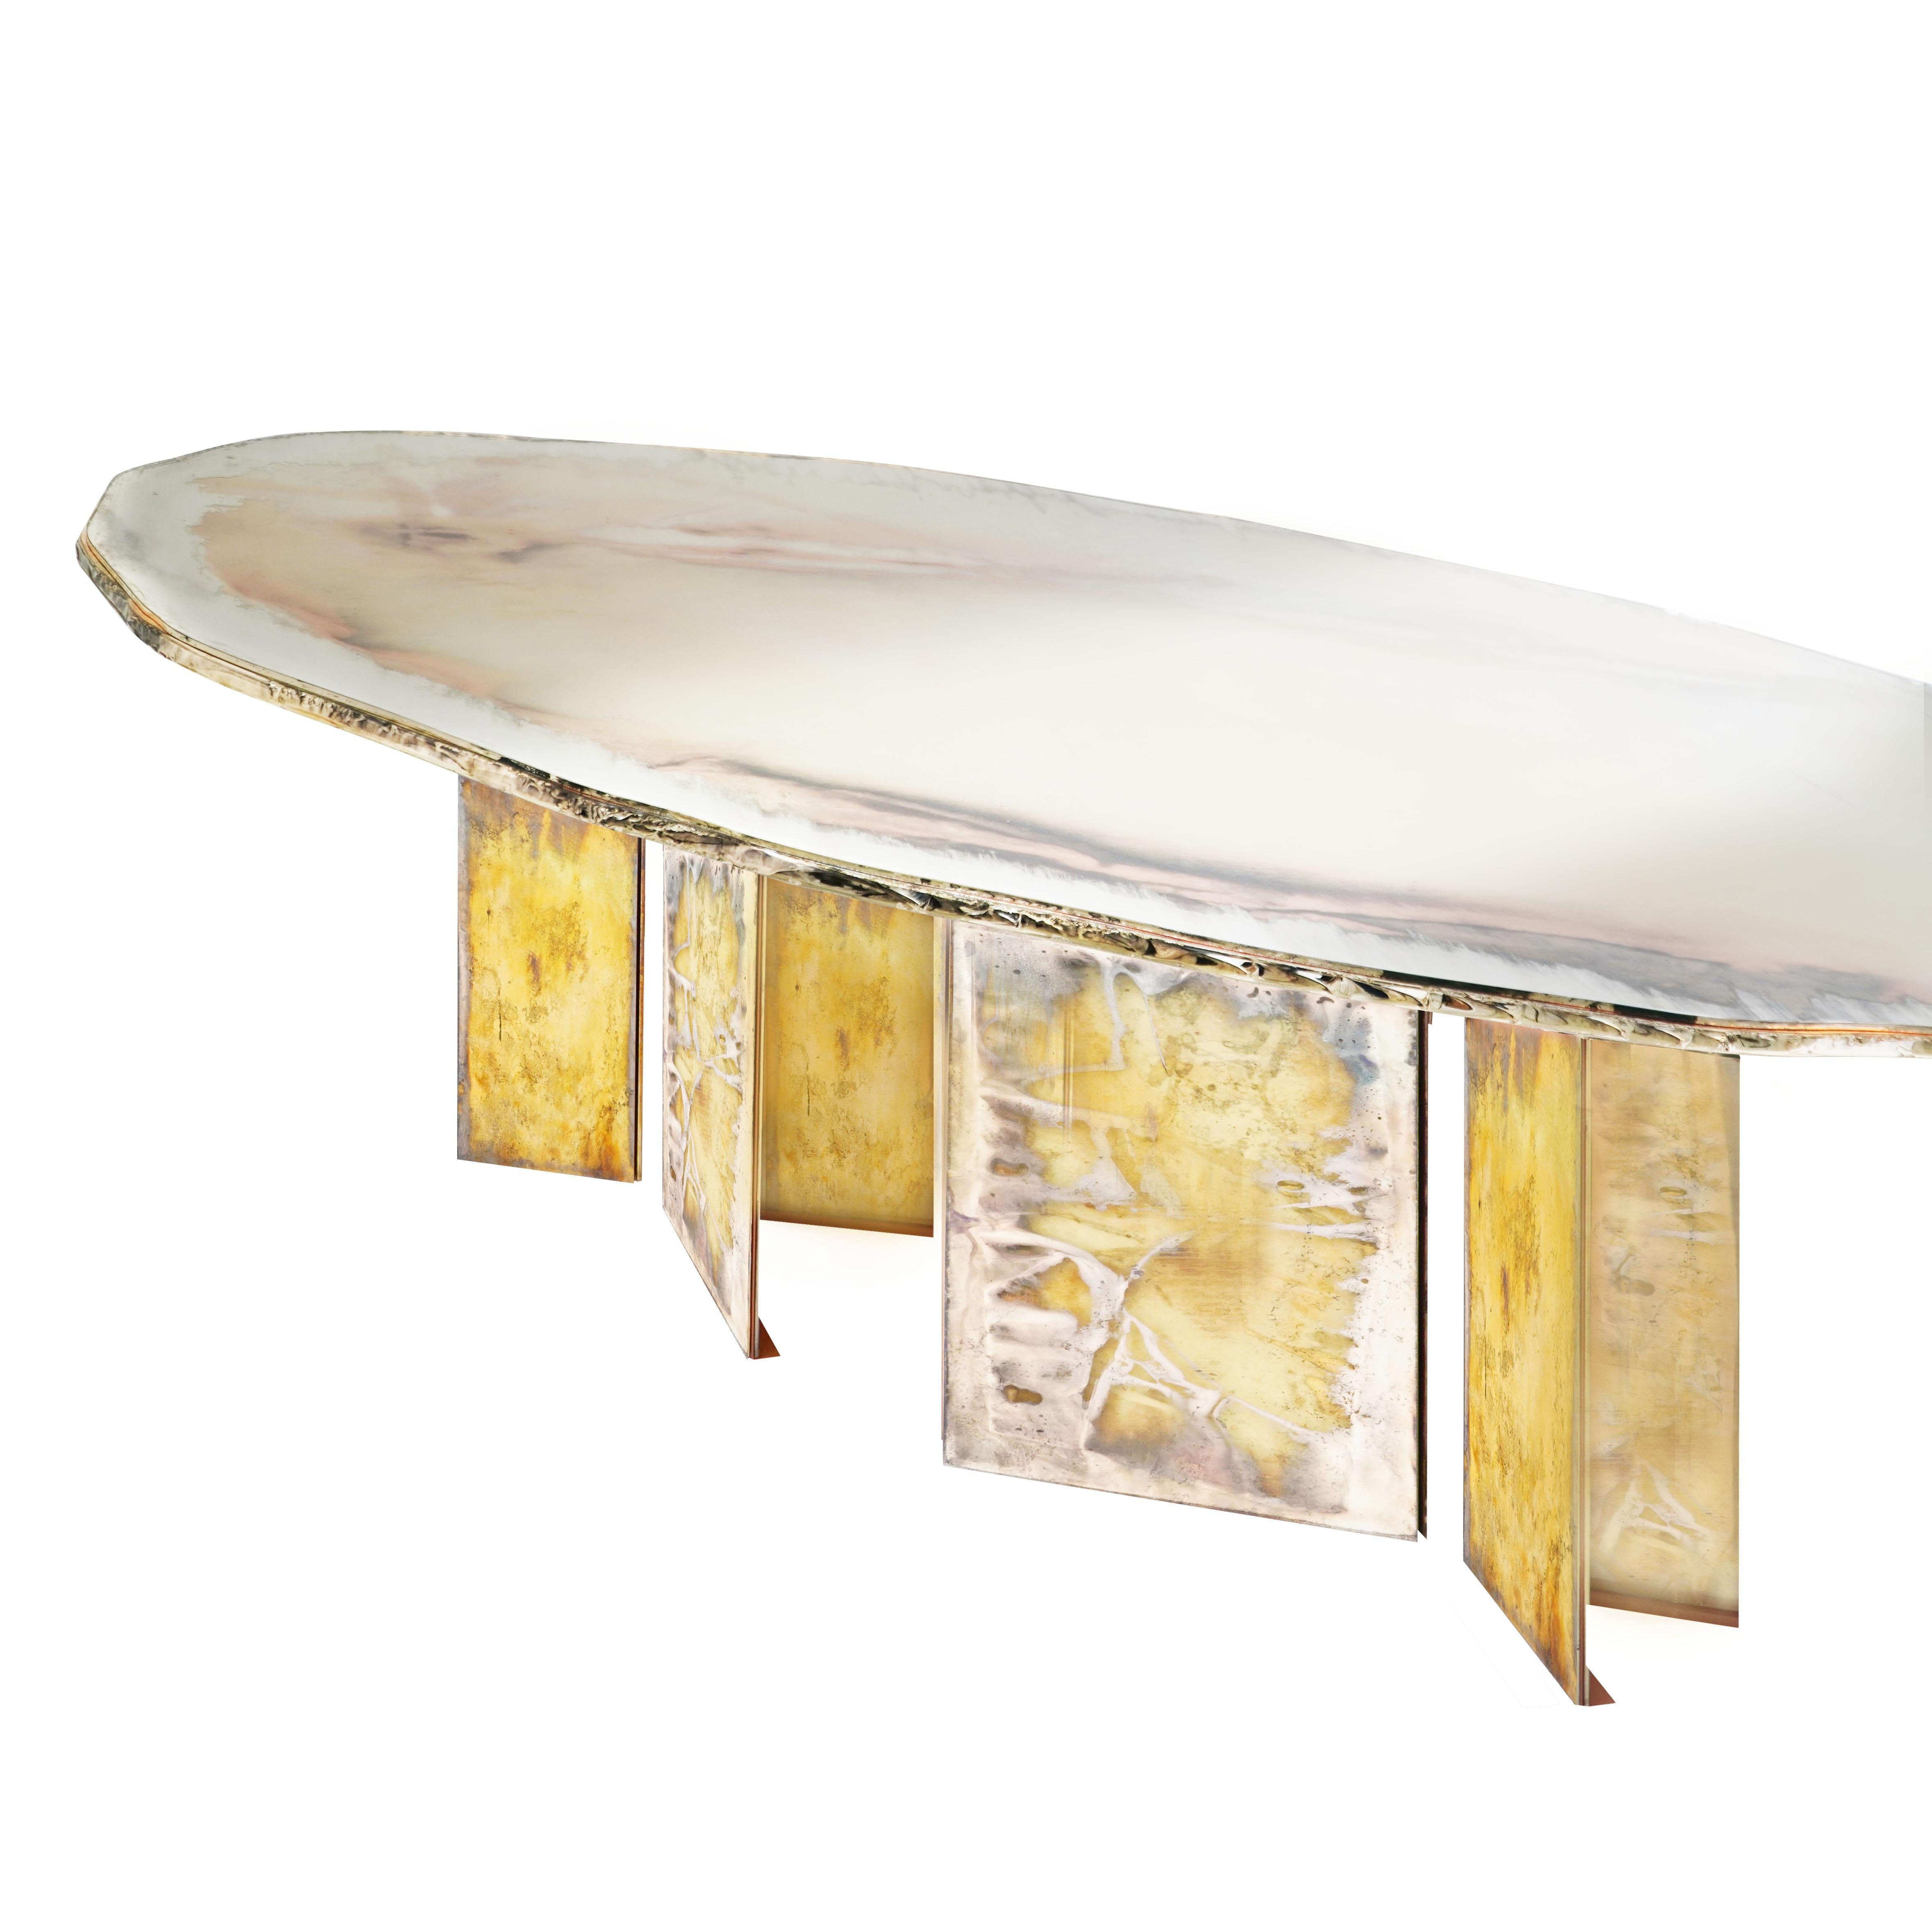 FLIGHT dining-coffee tables

Enhance your elegance and radiate brilliance with our collection of silver tables Flight!
Exquisite pieces that add a touch of shimmer and glamor to your home interior.

Flight is designed with a V-shaped silhouette that